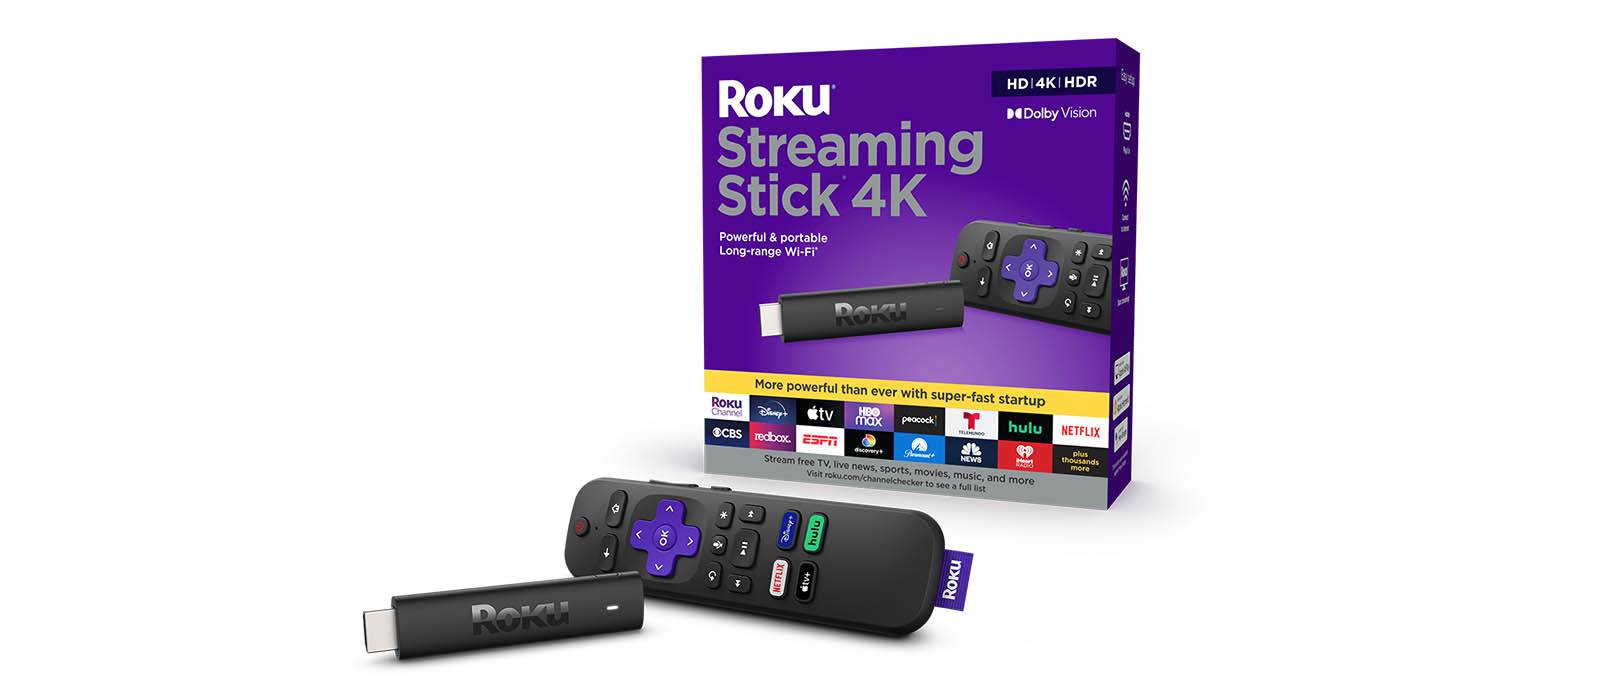 A product photo of the Roku Streaming Stick 4K